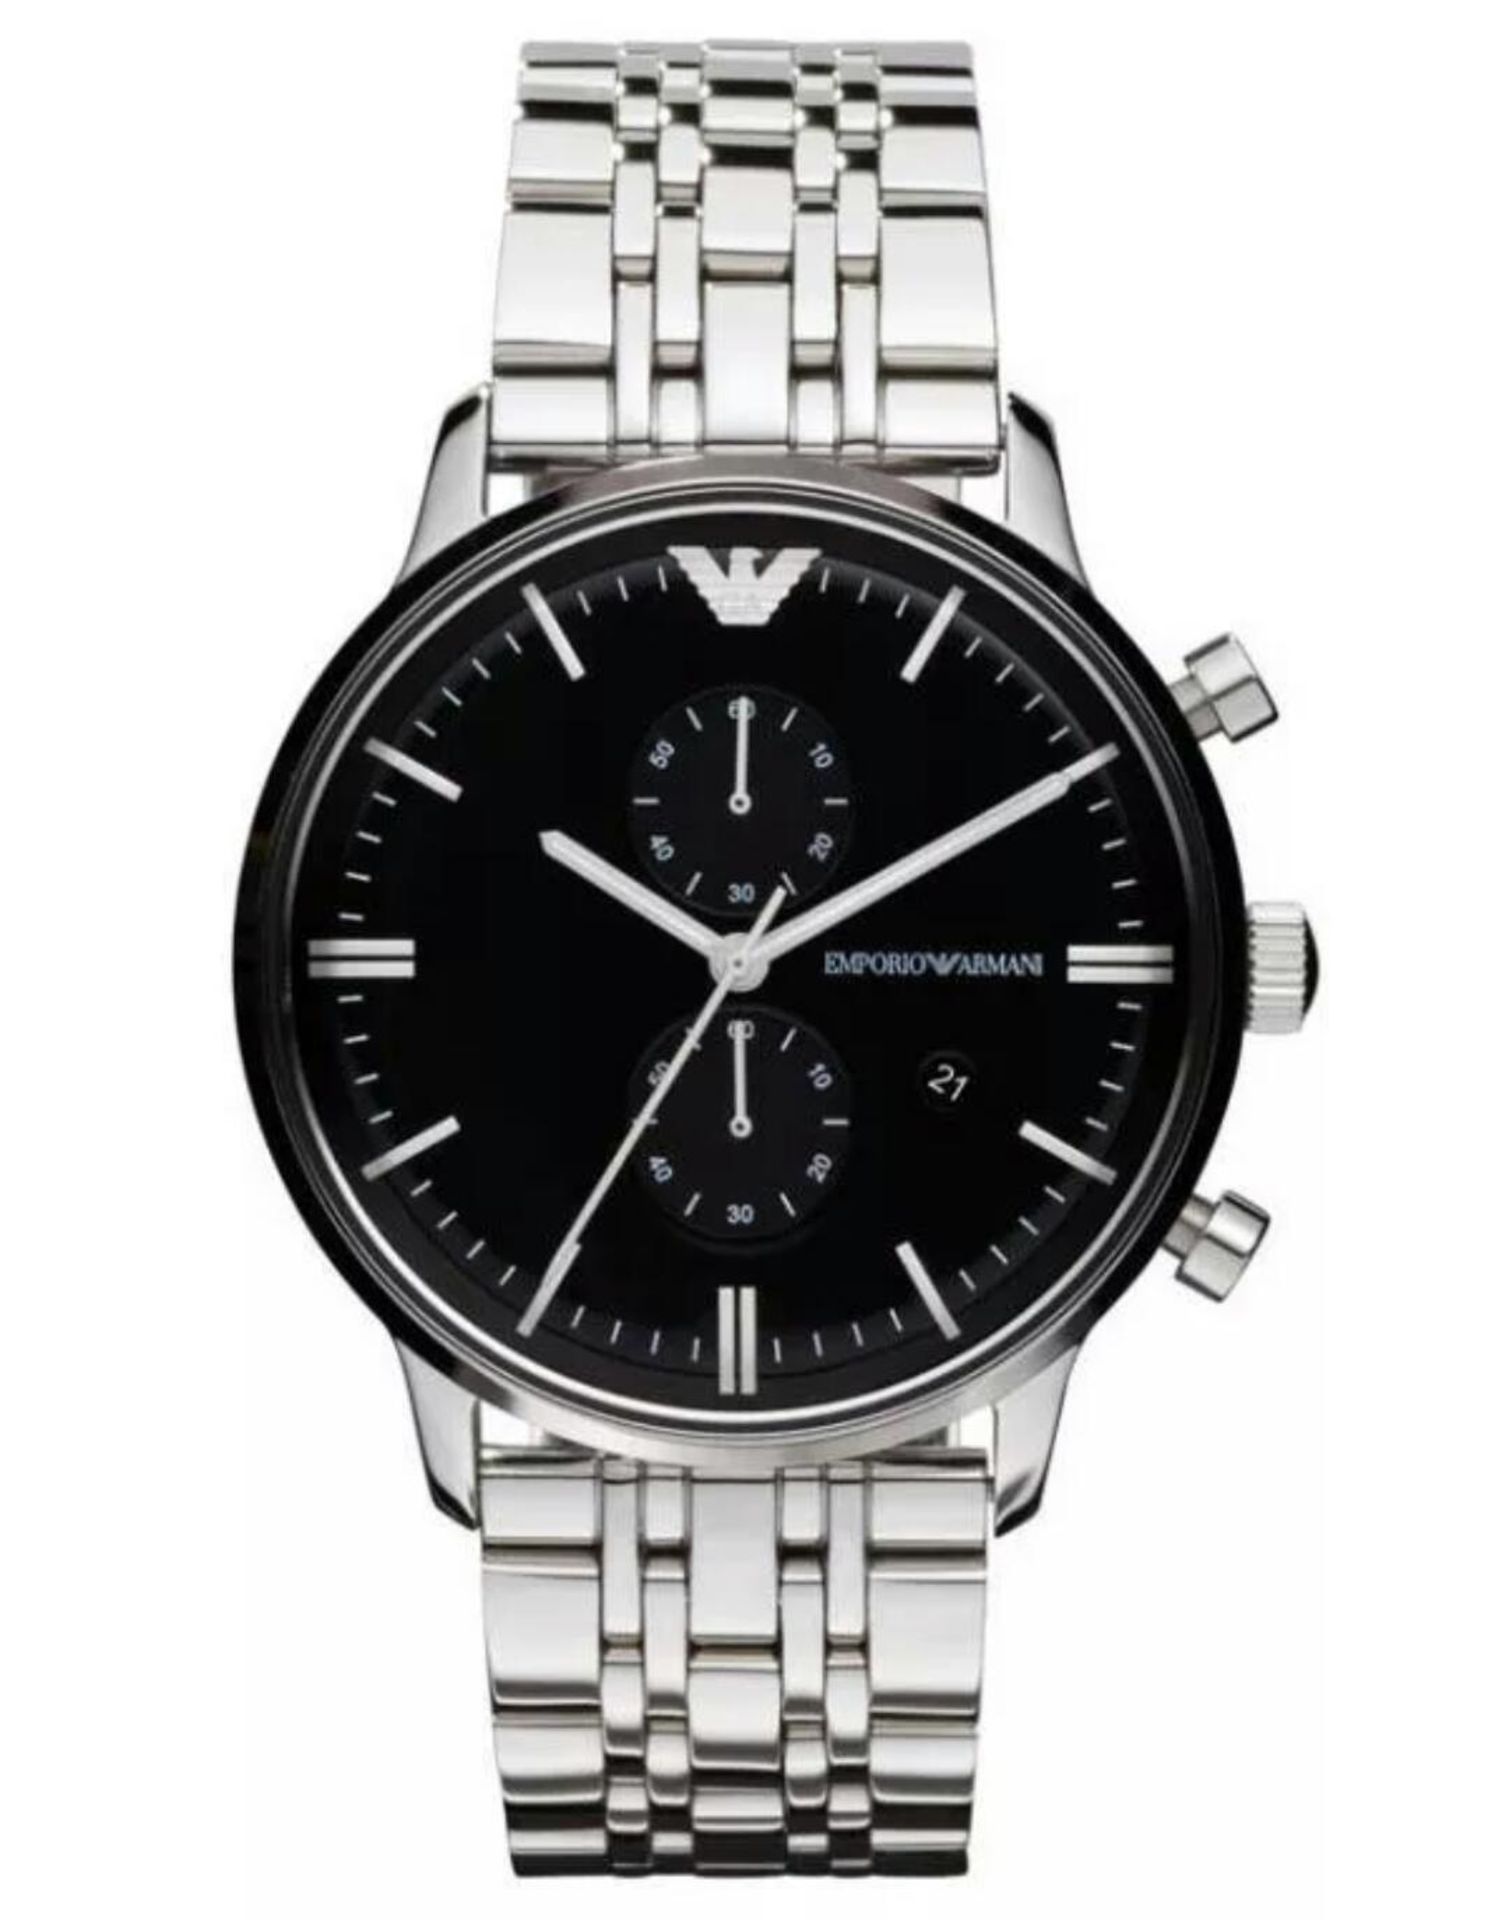 BRAND NEW GENTS EMPORIO ARMANI WATCH, AR0389, COMPLETE WITH ORIGINAL BOX, MANUAL AND CERTIFICATE -